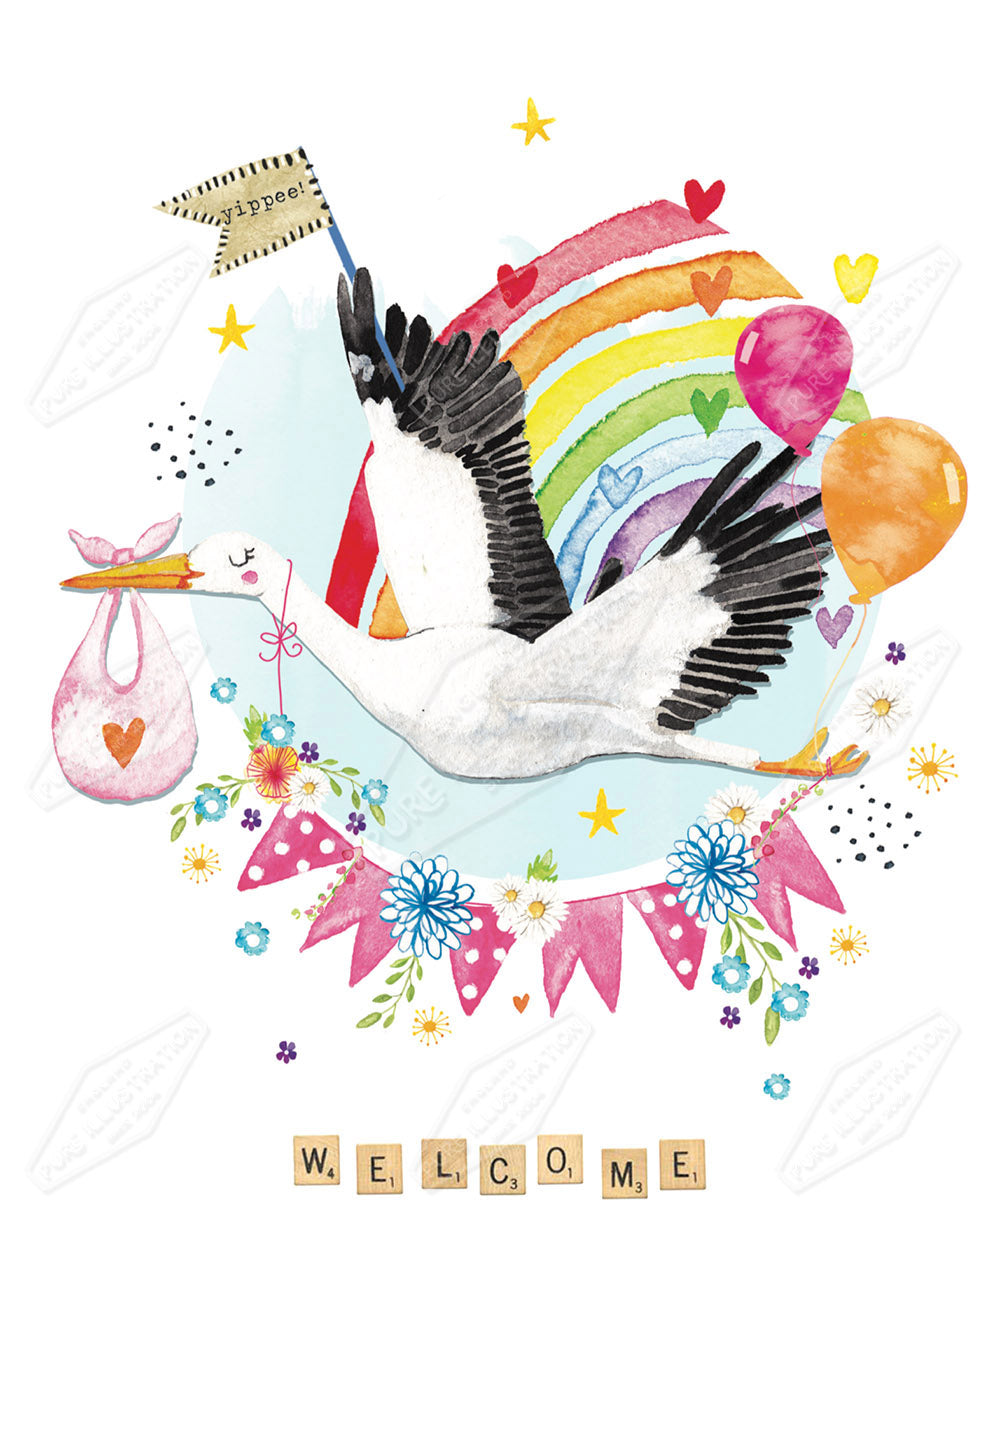 00034369EST- Emily Stalley is represented by Pure Art Licensing Agency - New Baby Greeting Card Design